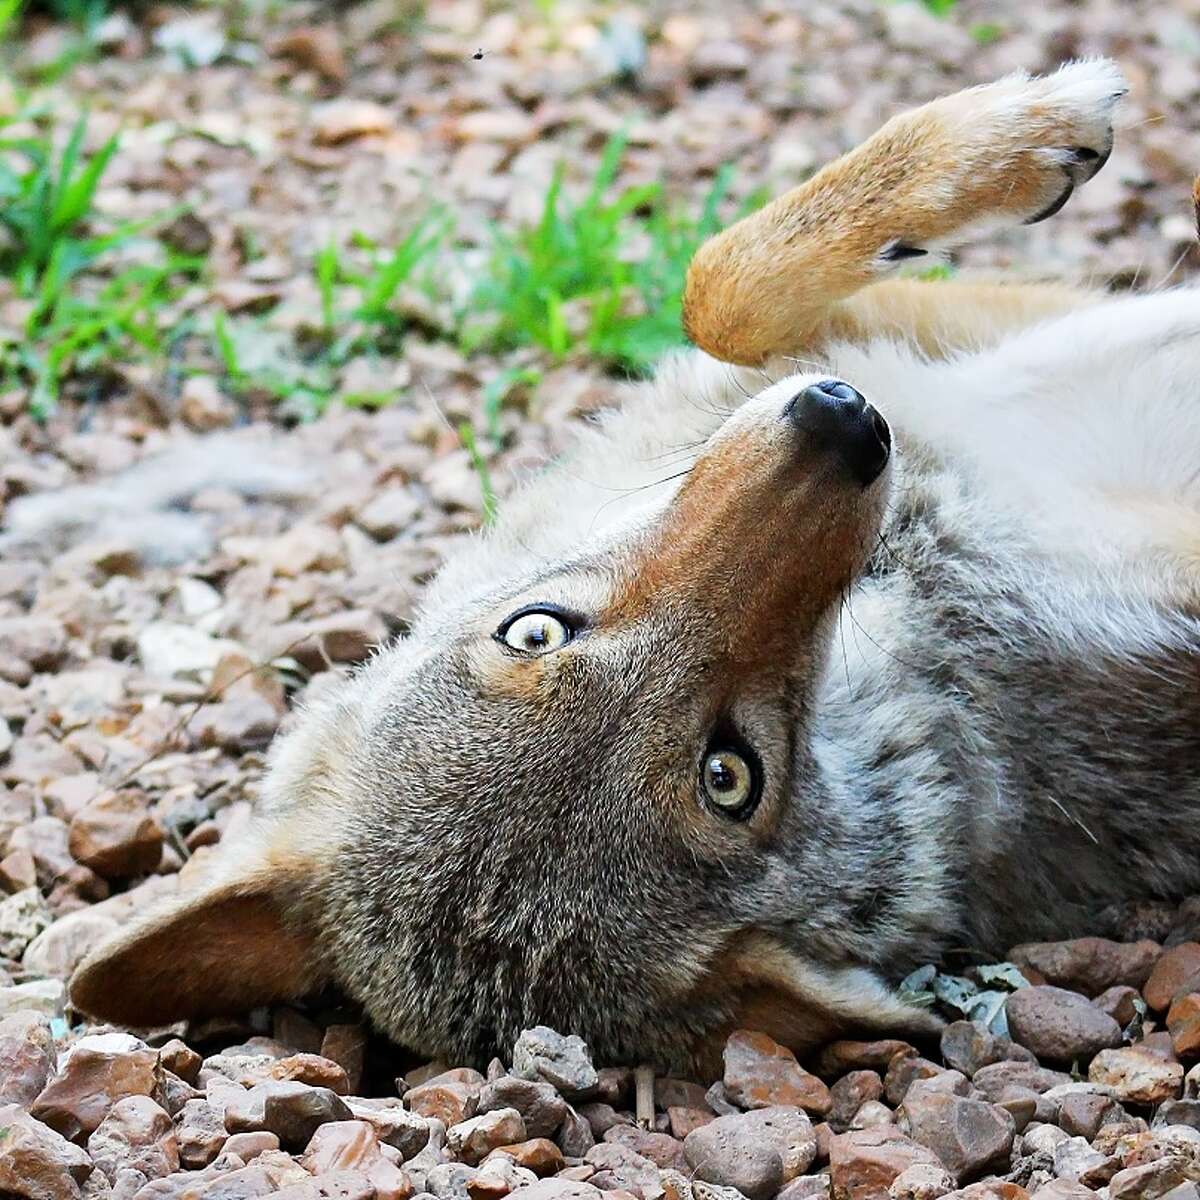 The Sierra Club will host "Coyotes: Friend or Foe?" May 10 at 6:30 p.m. at The Old Bakery Beer Company, 400 Landmarks Blvd., Alton.